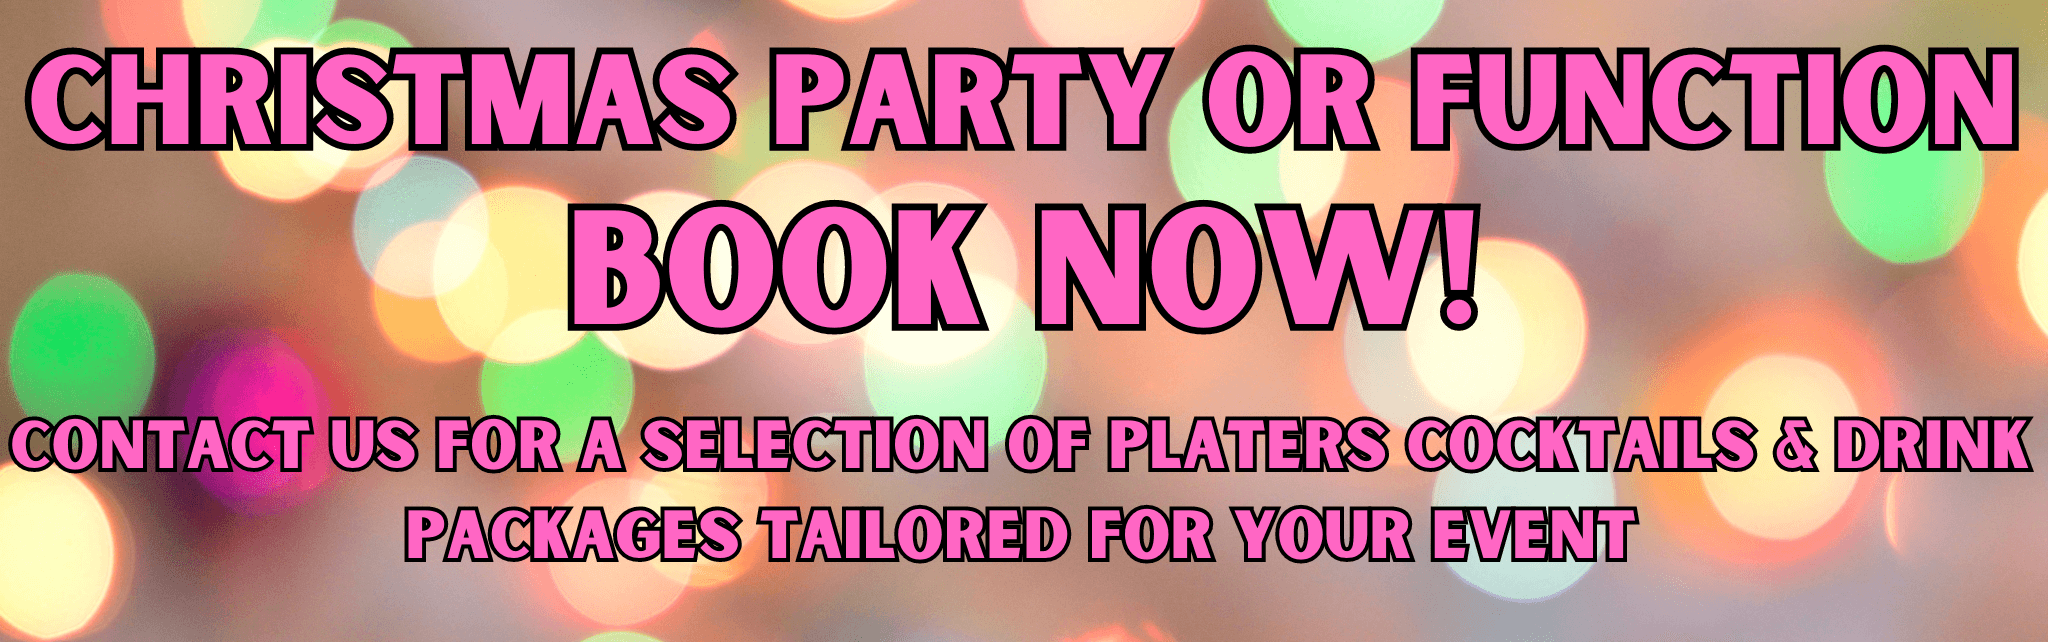 Book now for your Chistmas party or function!